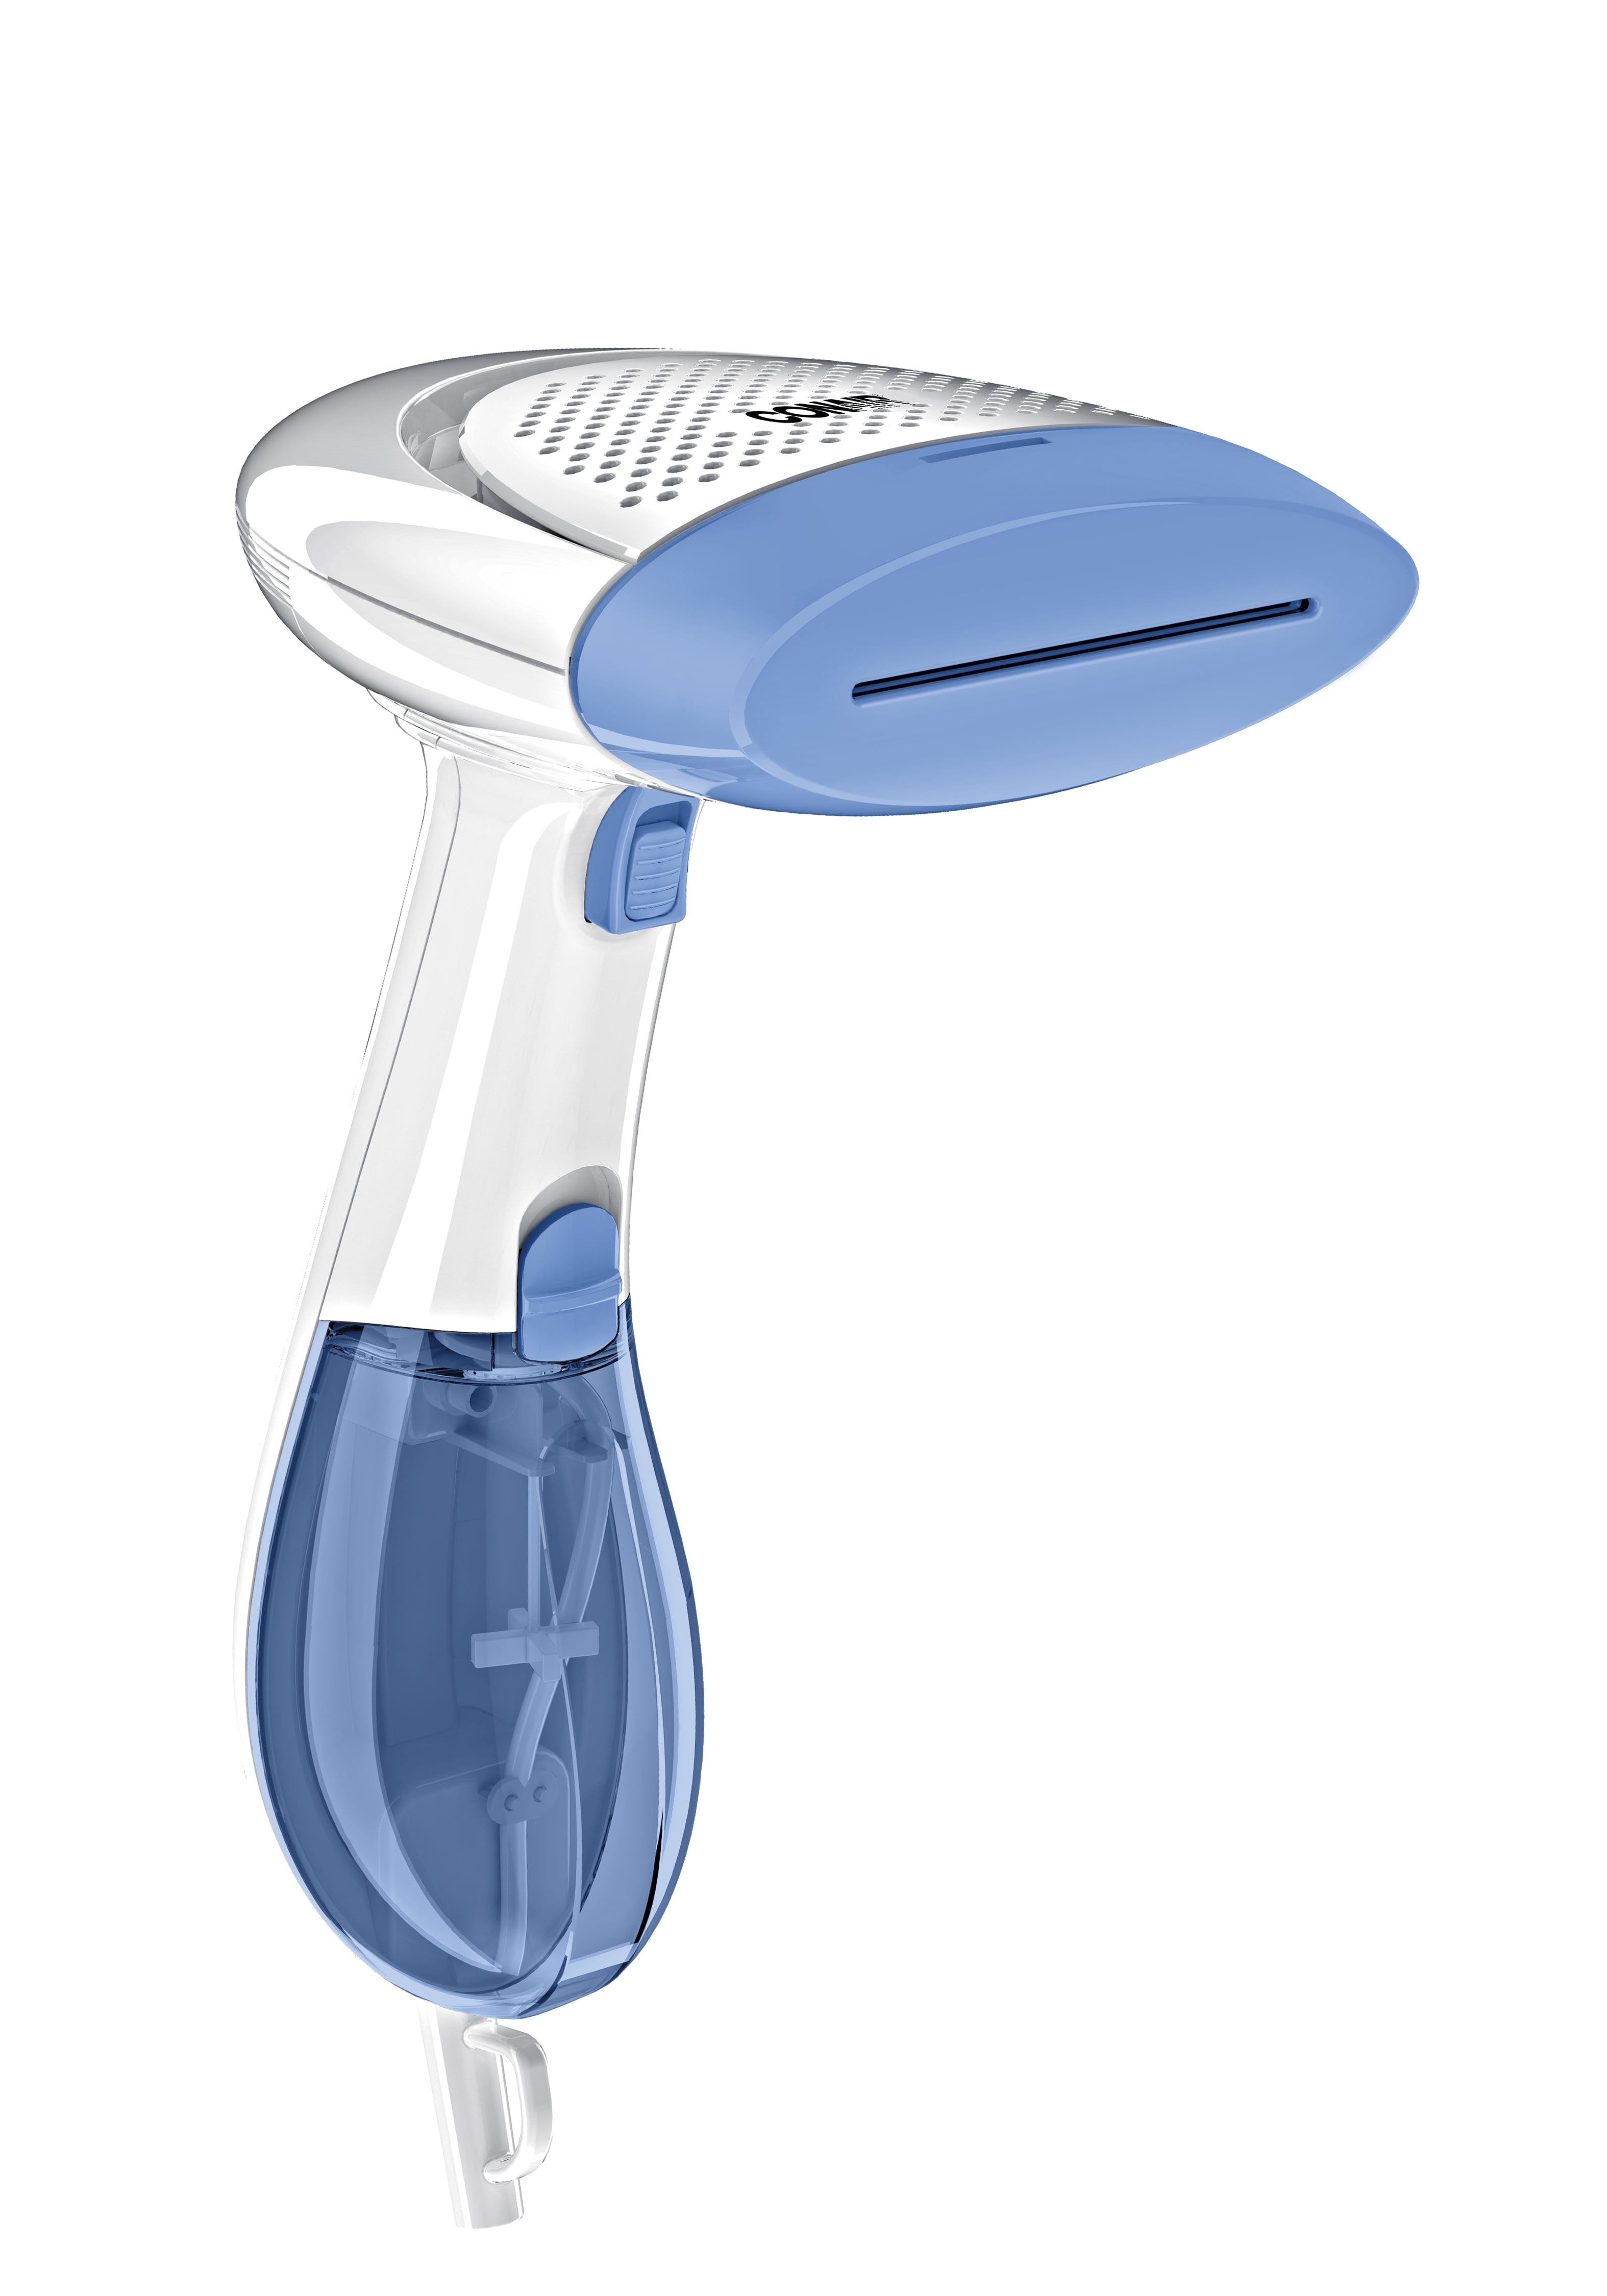 Conair Gs45rs Extreme Steam Fabric Steamer With Dual Heat for sale online 